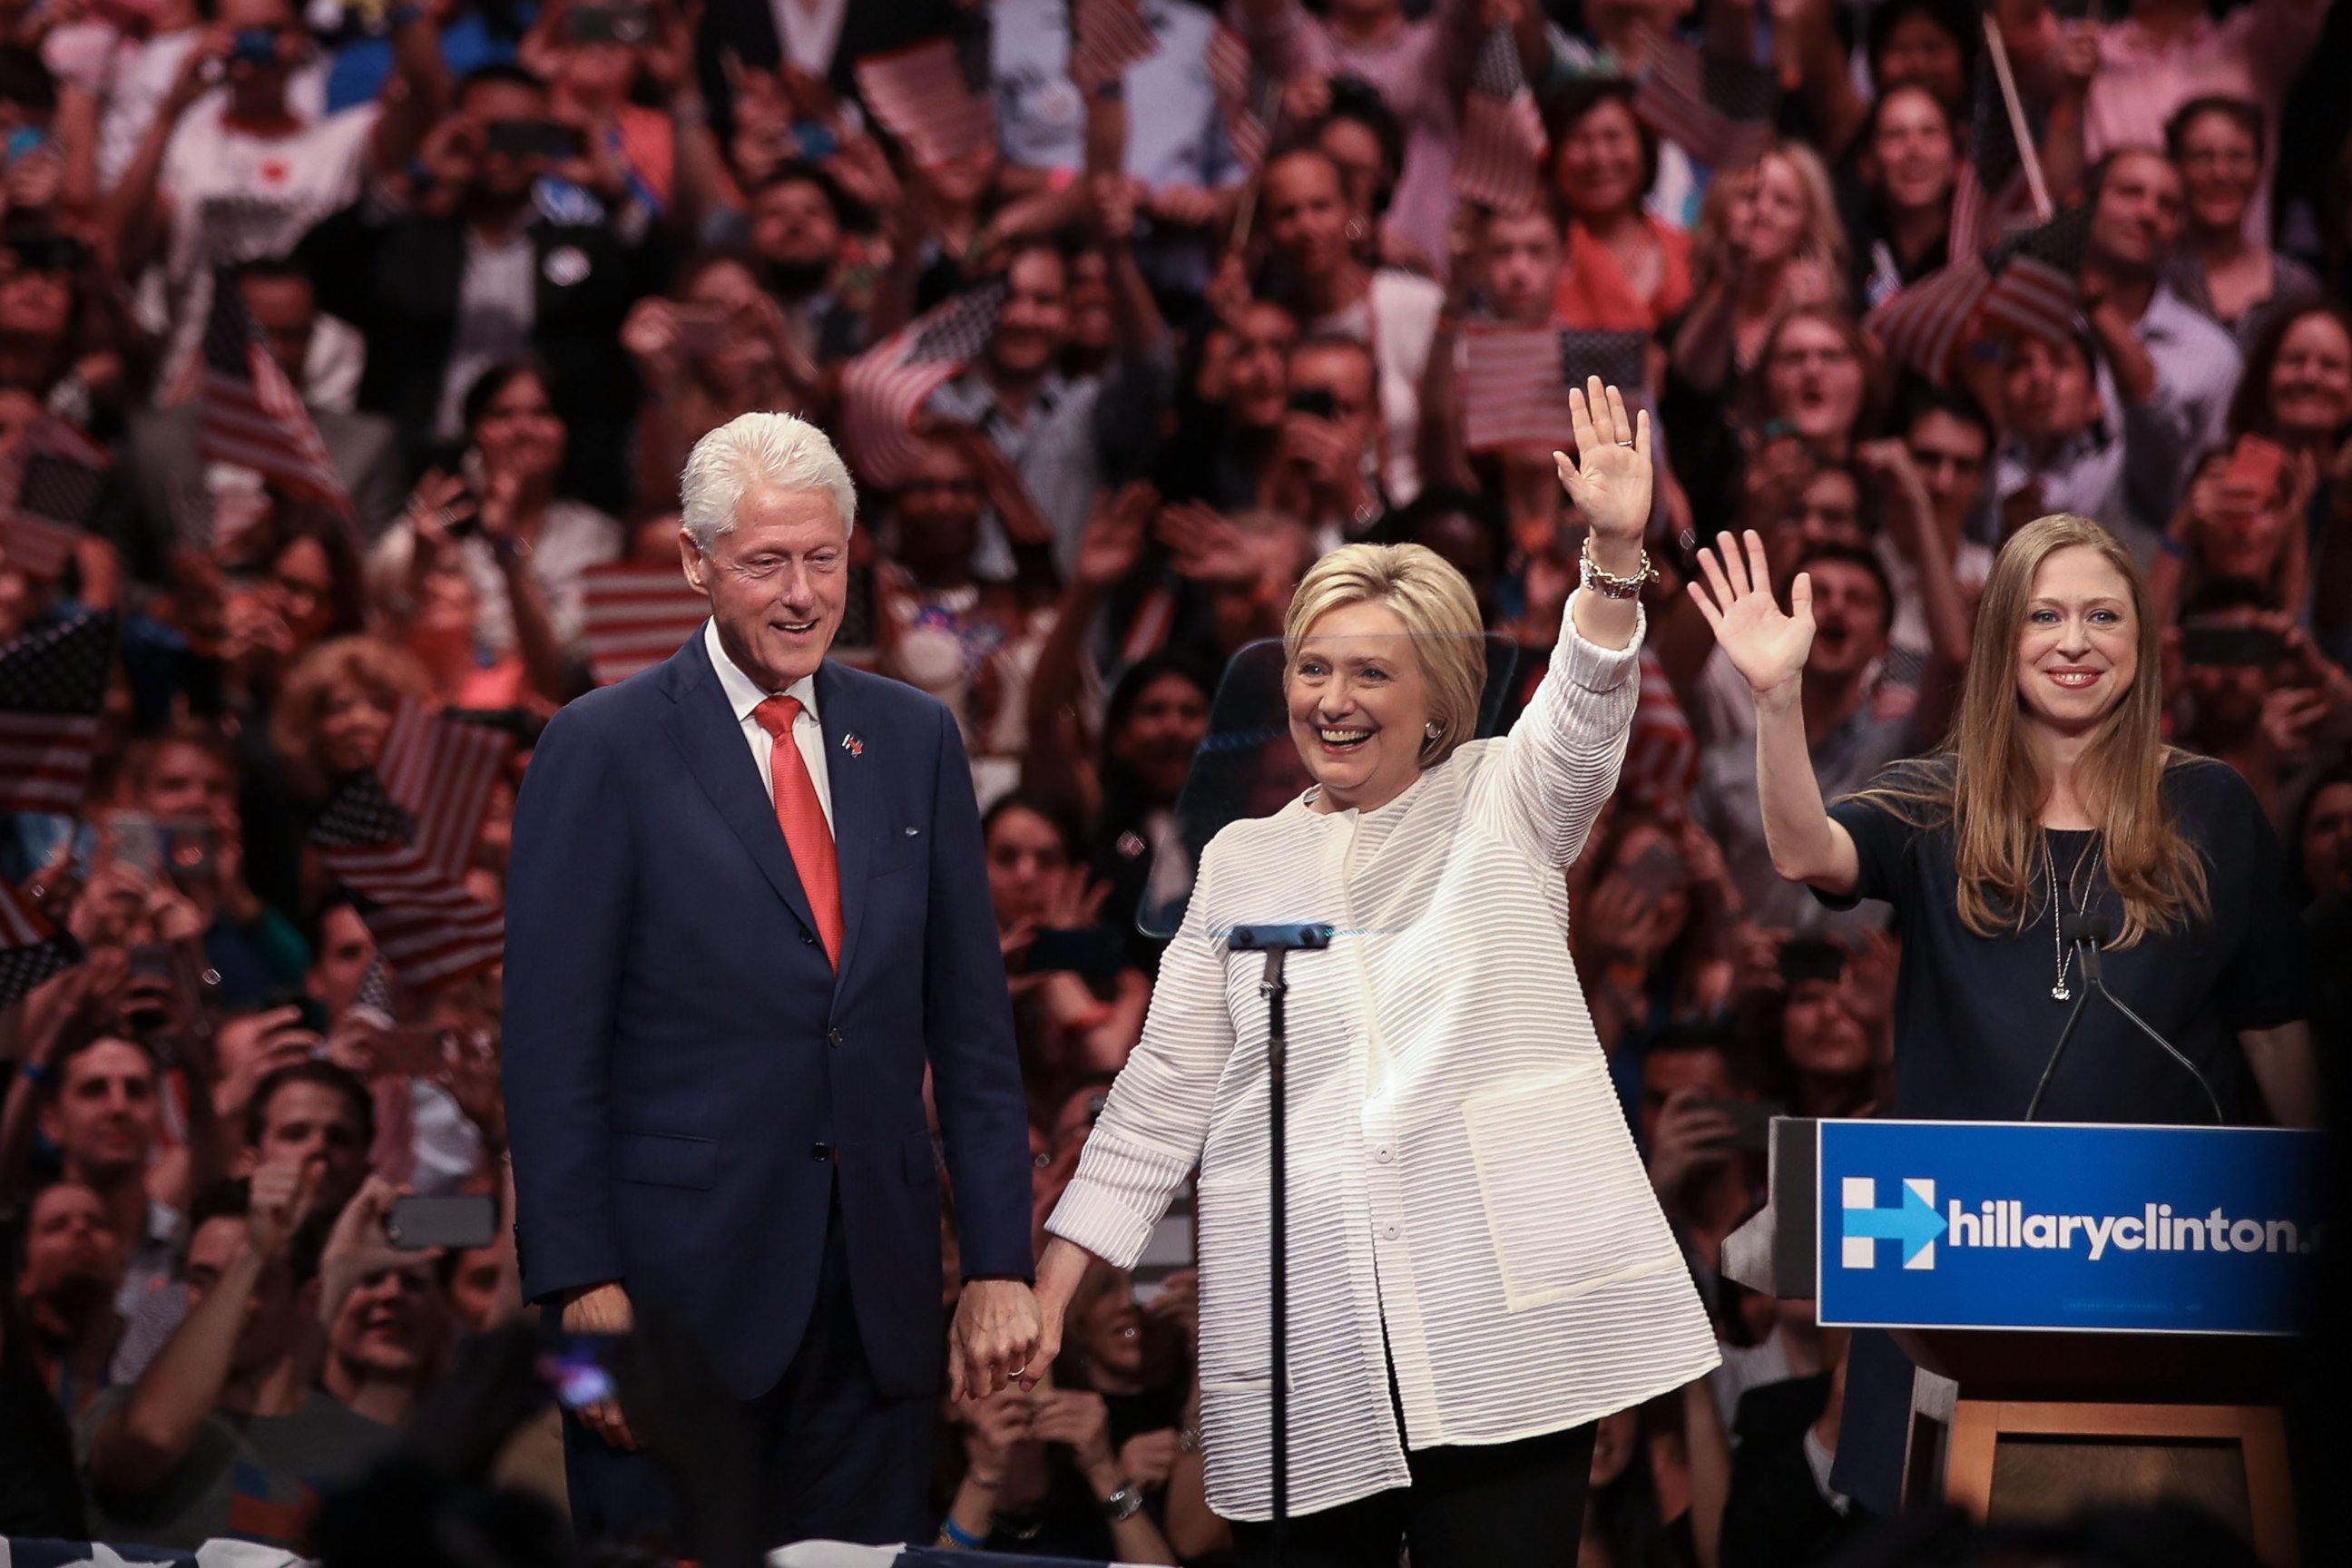 PHOTO: Former president Bill Clinton, Democratic presidential candidate Hillary Clinton and daughter Chelsea Clinton during a primary night rally at the Duggal Greenhouse in the Brooklyn Navy Yard, June 7, 2016 in the Brooklyn borough of New York City. 